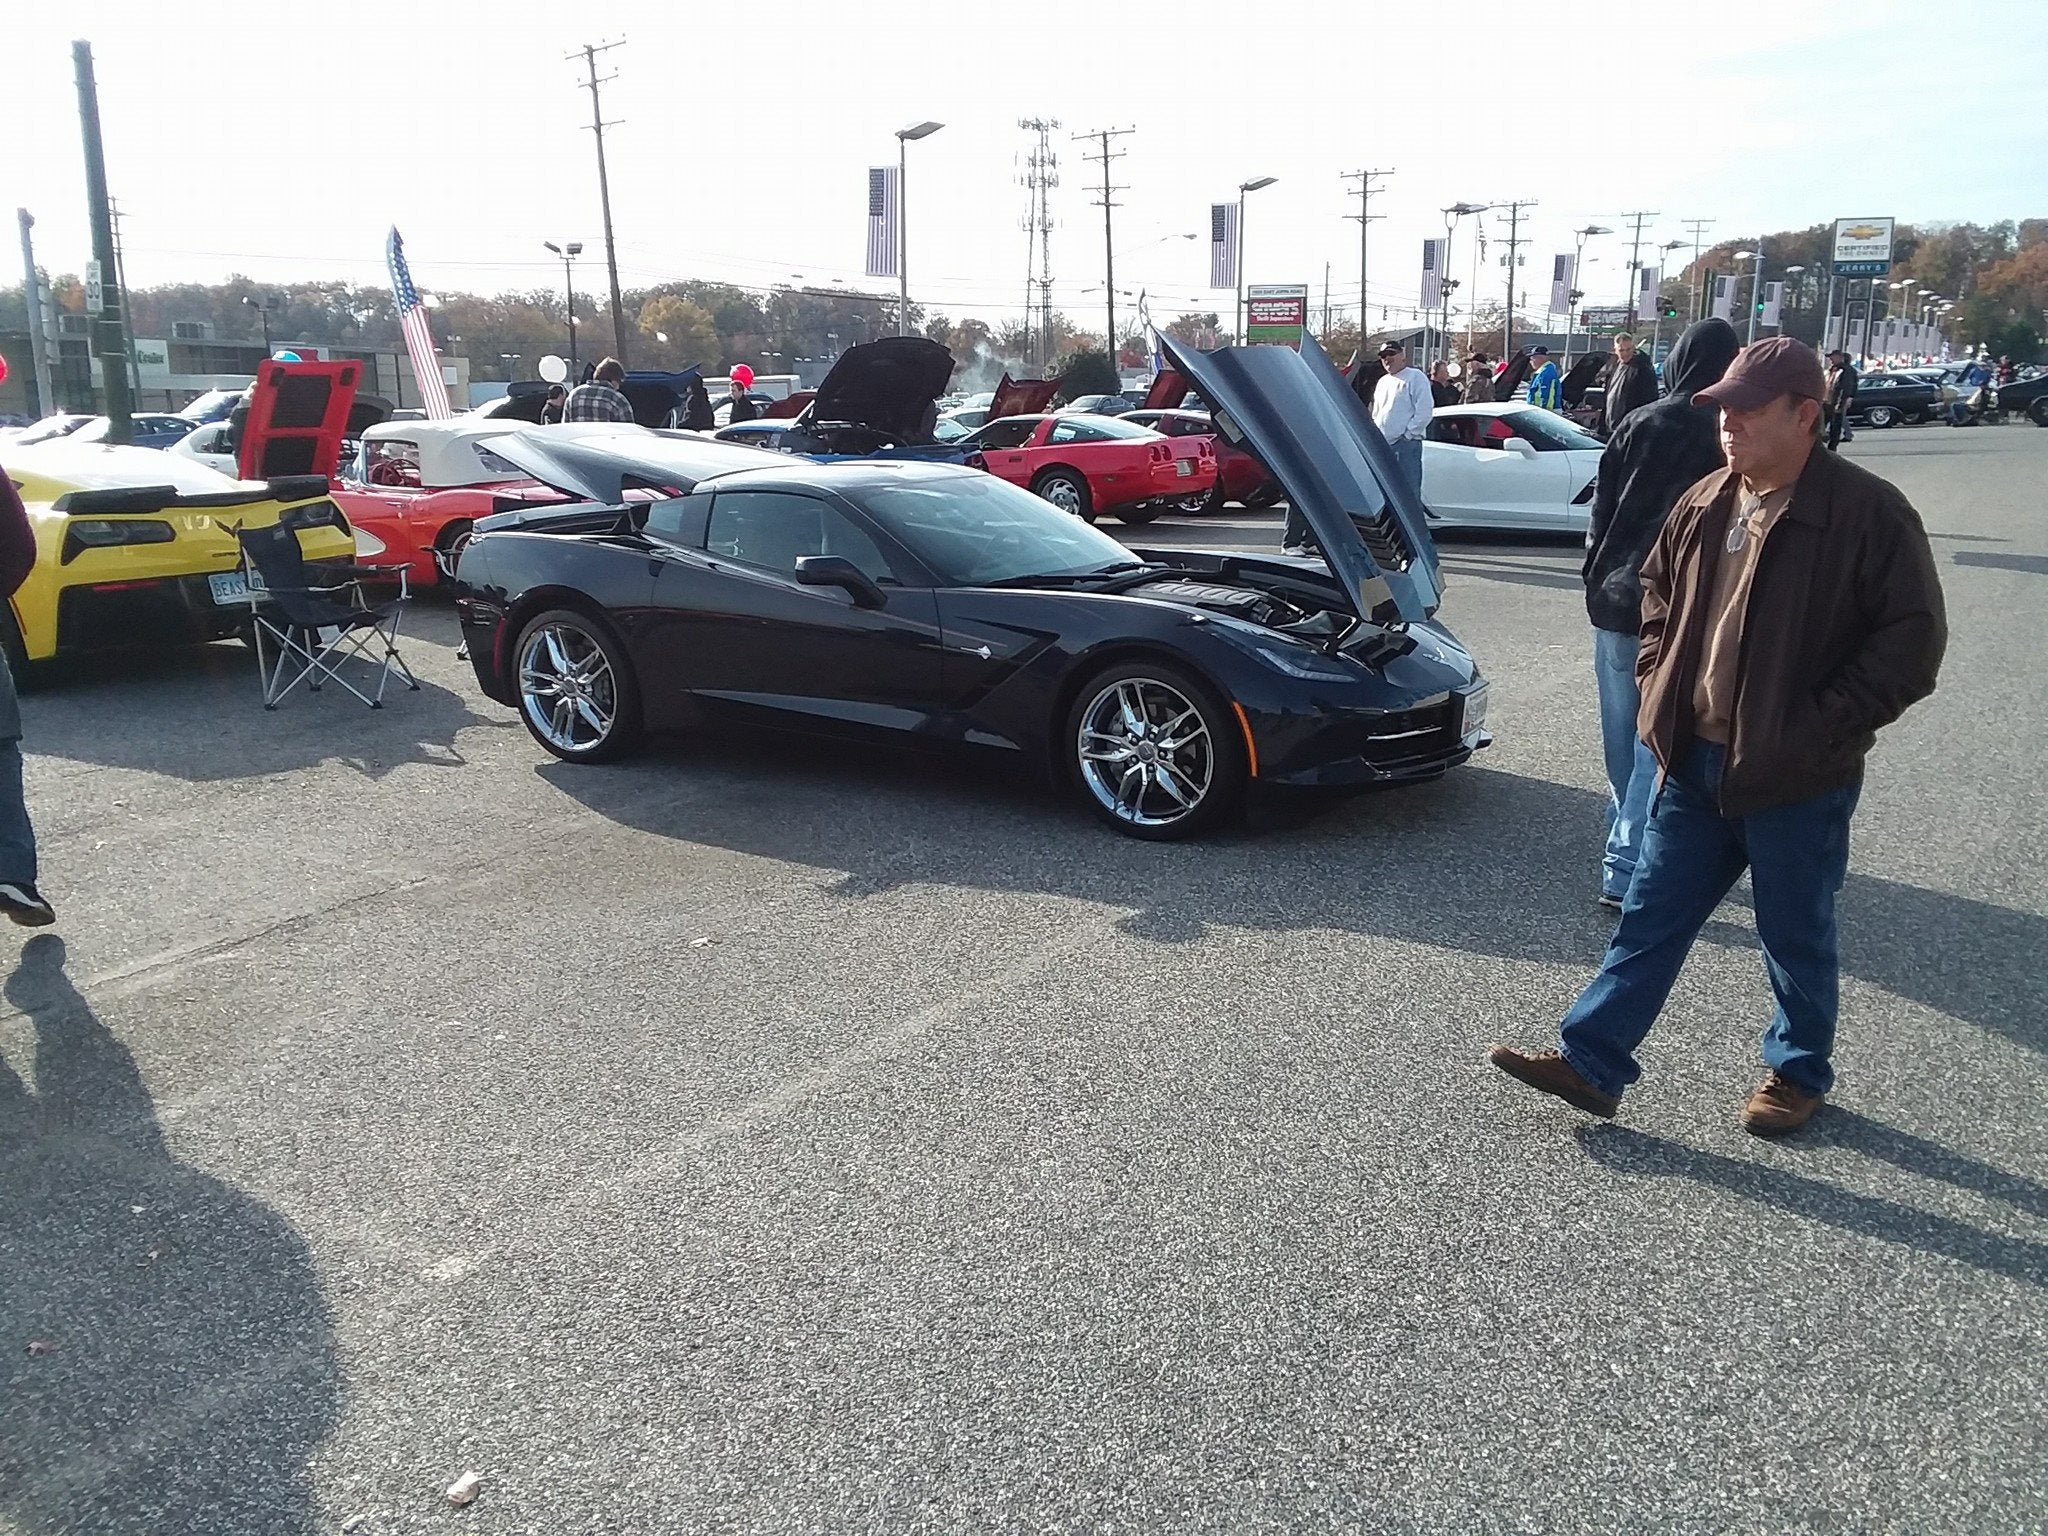 2017 Fall Car Show in Baltimore, MD